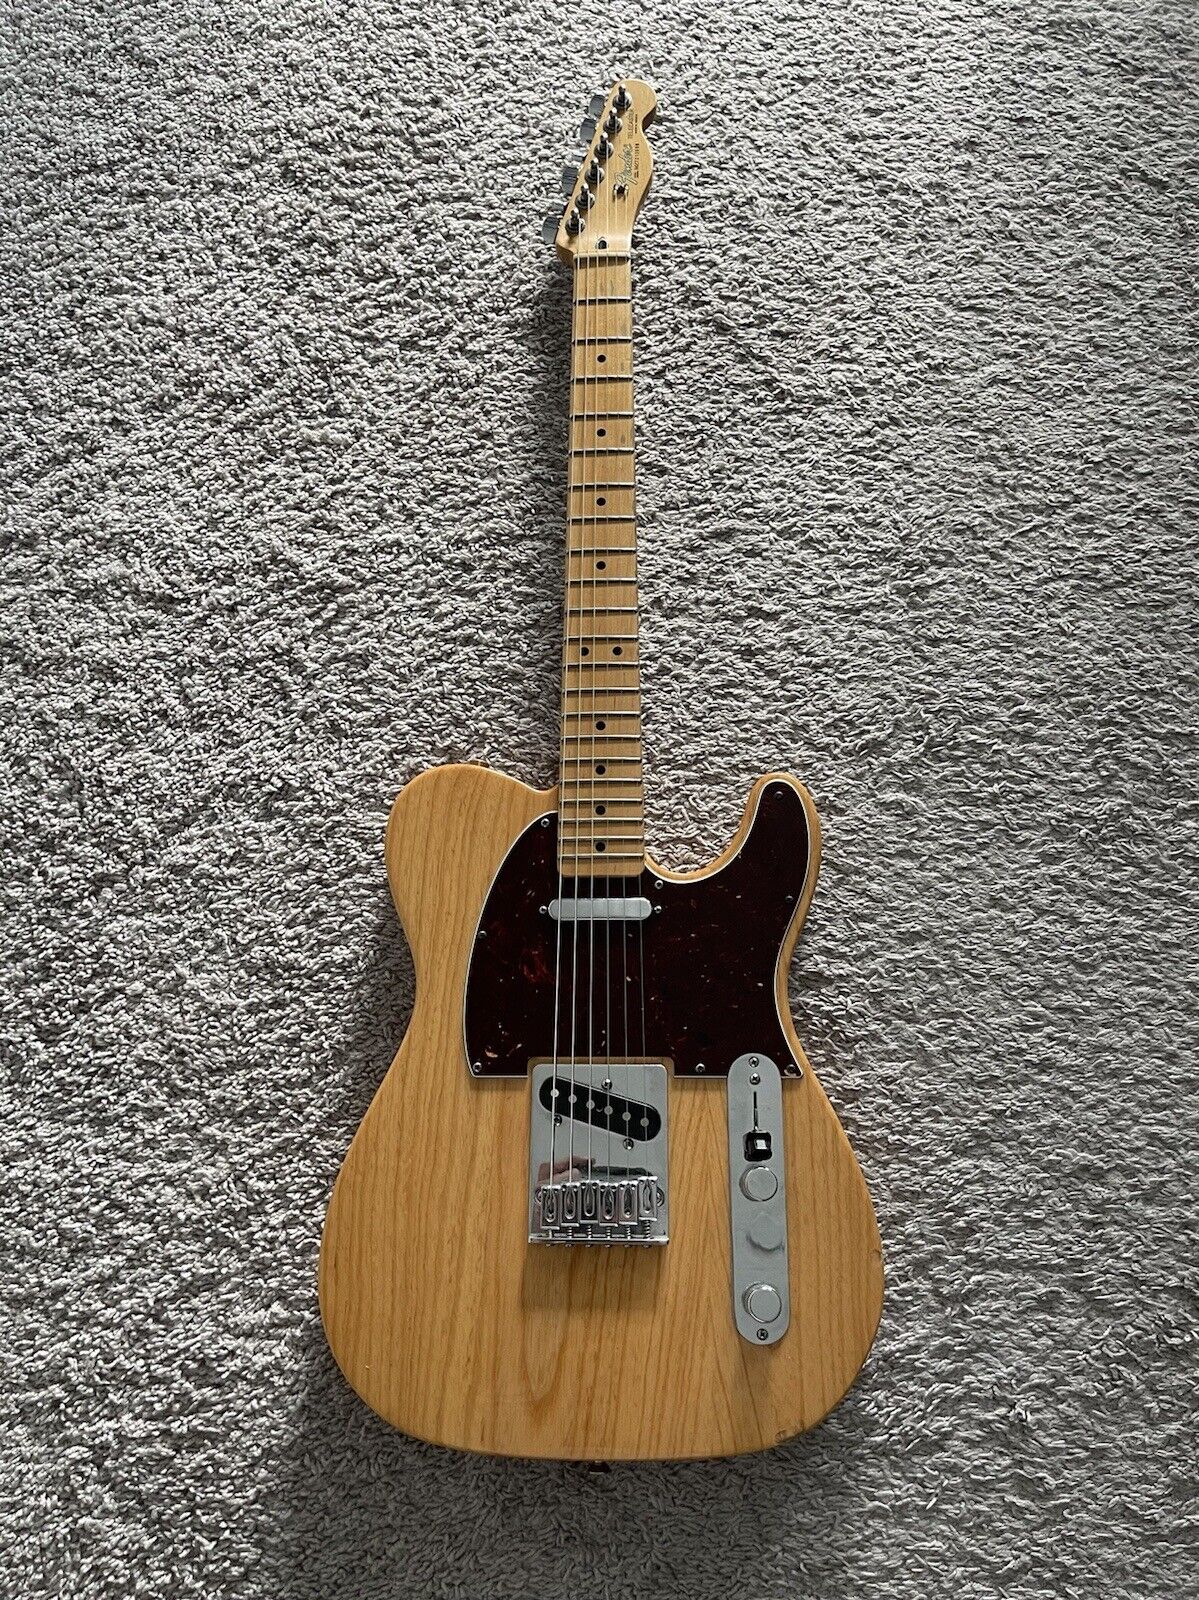 worry Carelessness volleyball Fender FSR Natural Ash Telecaster Deluxe 2007 Special Edition Maple FB  Guitar | eBay